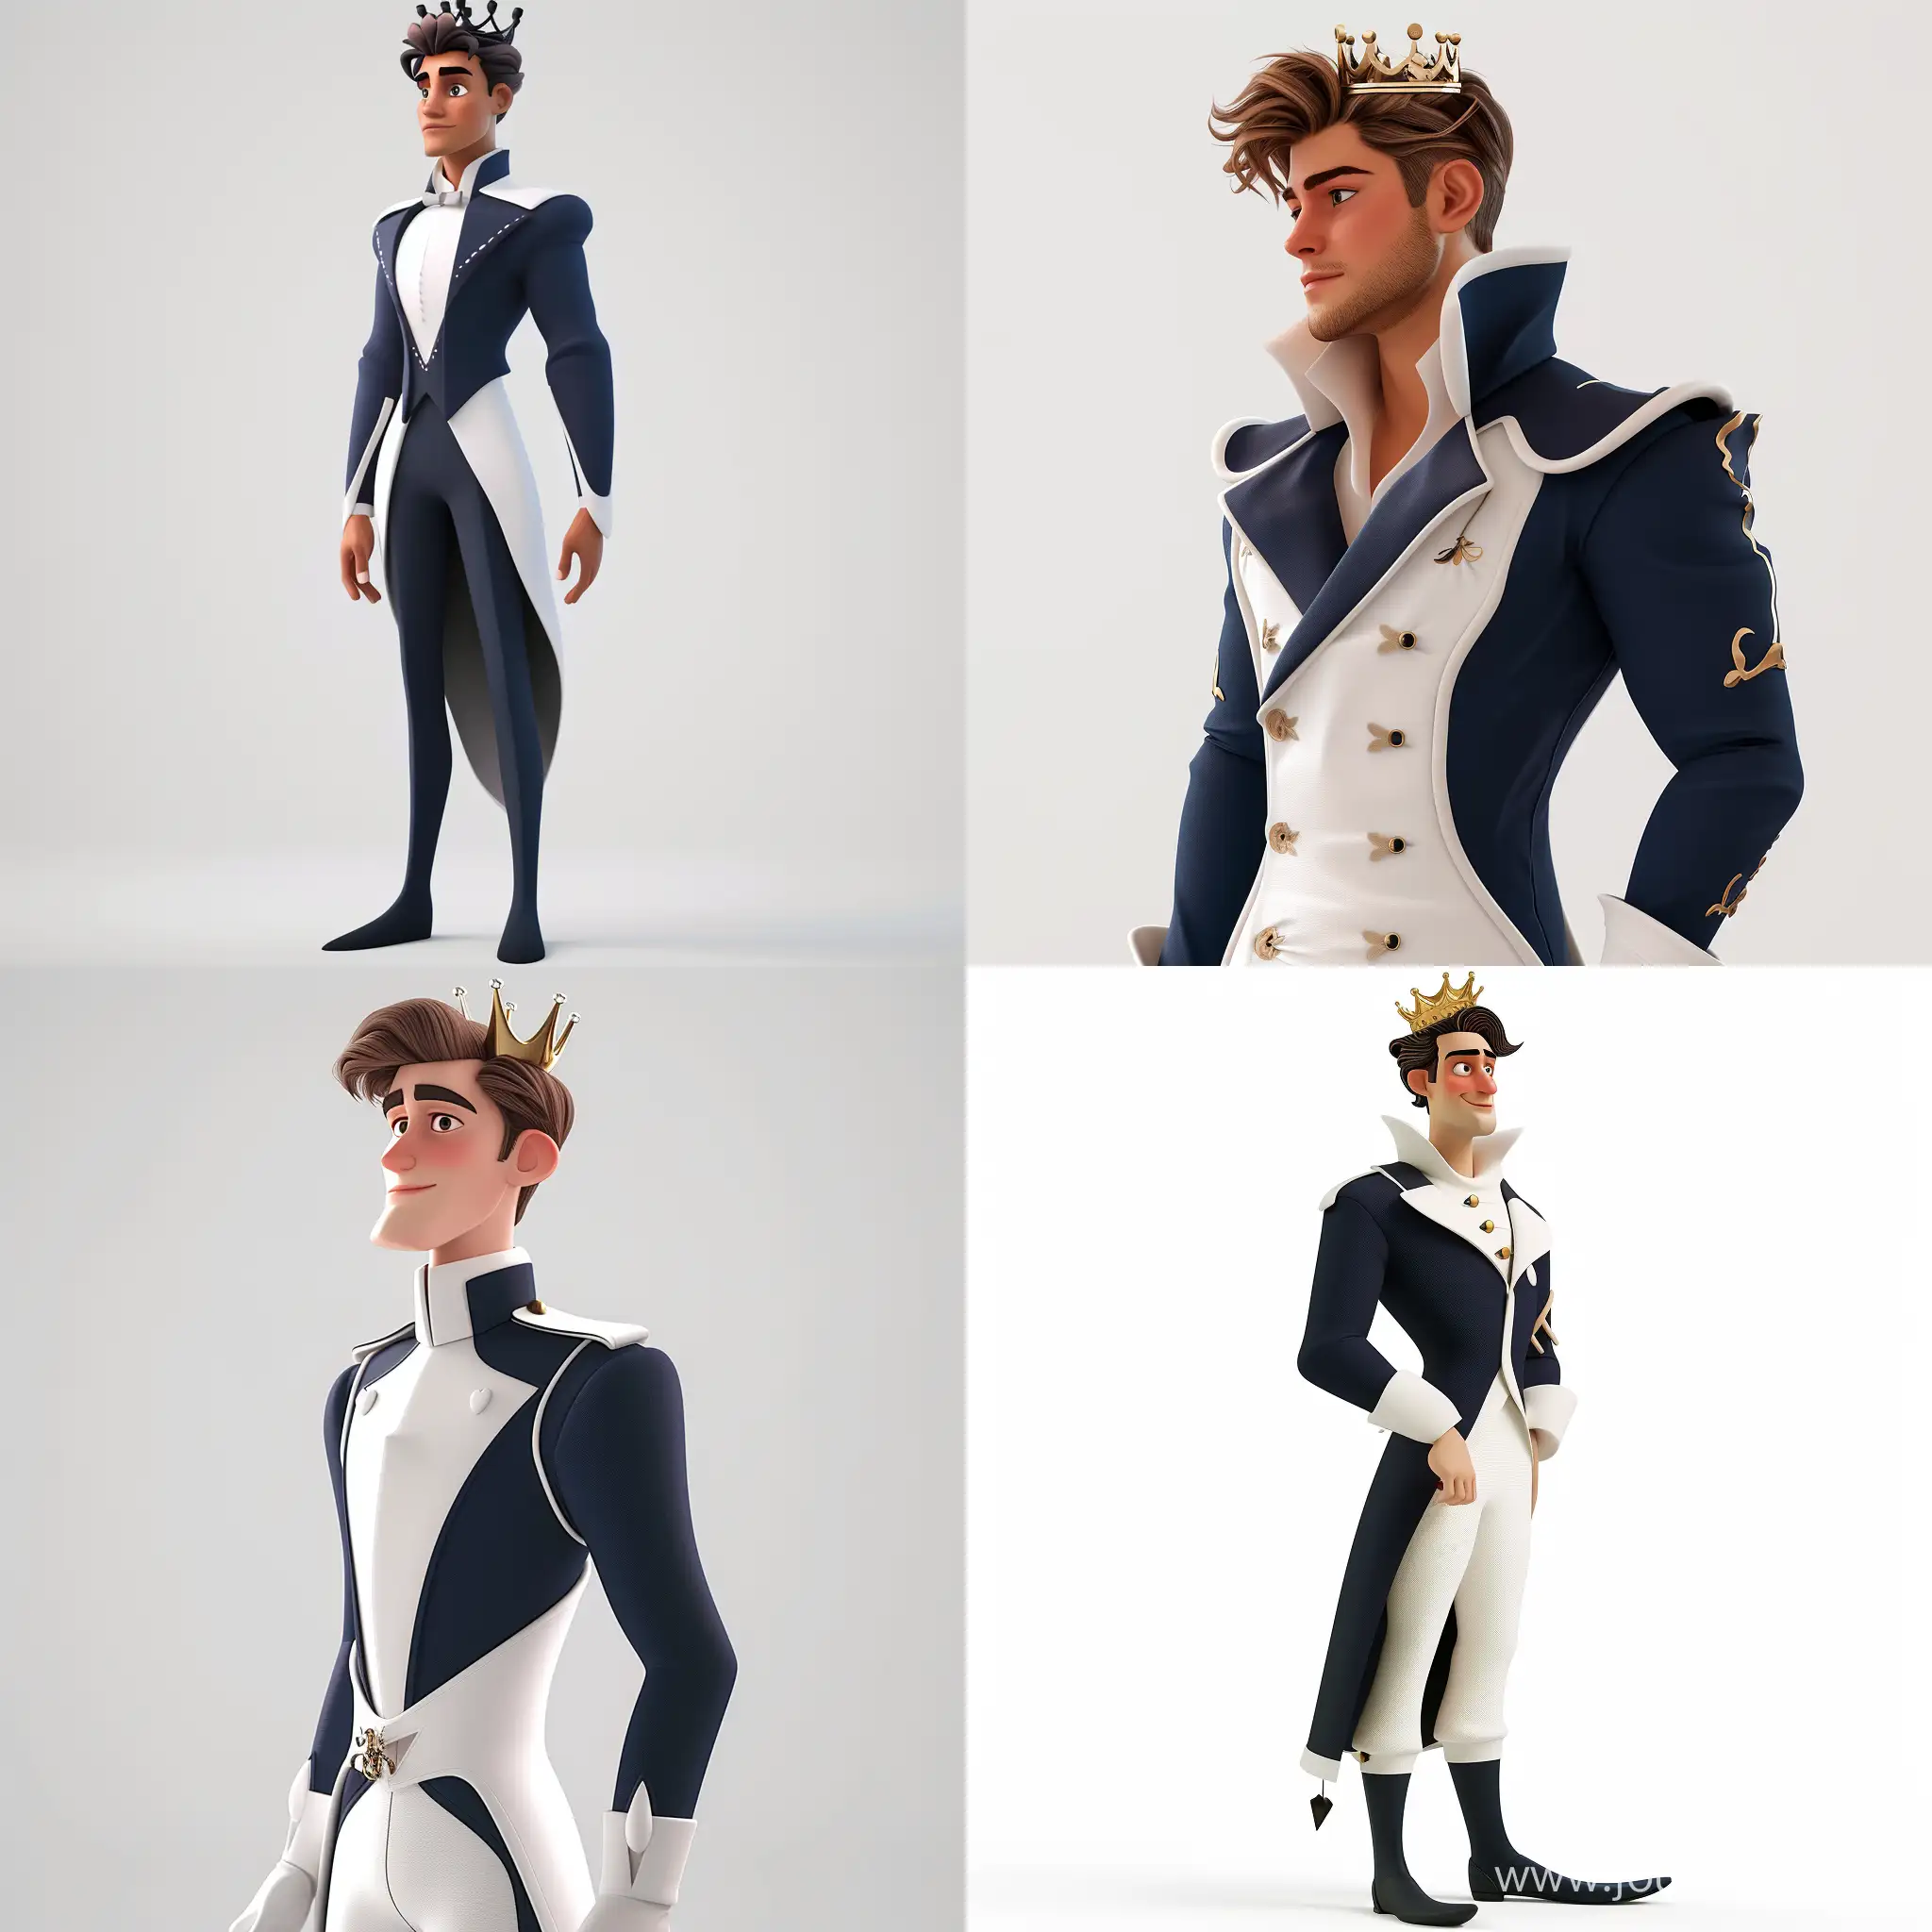 Modern-Crowned-Man-in-Disney-Studio-Style-Cinematic-Pose-in-Navy-Blue-White-Clothes